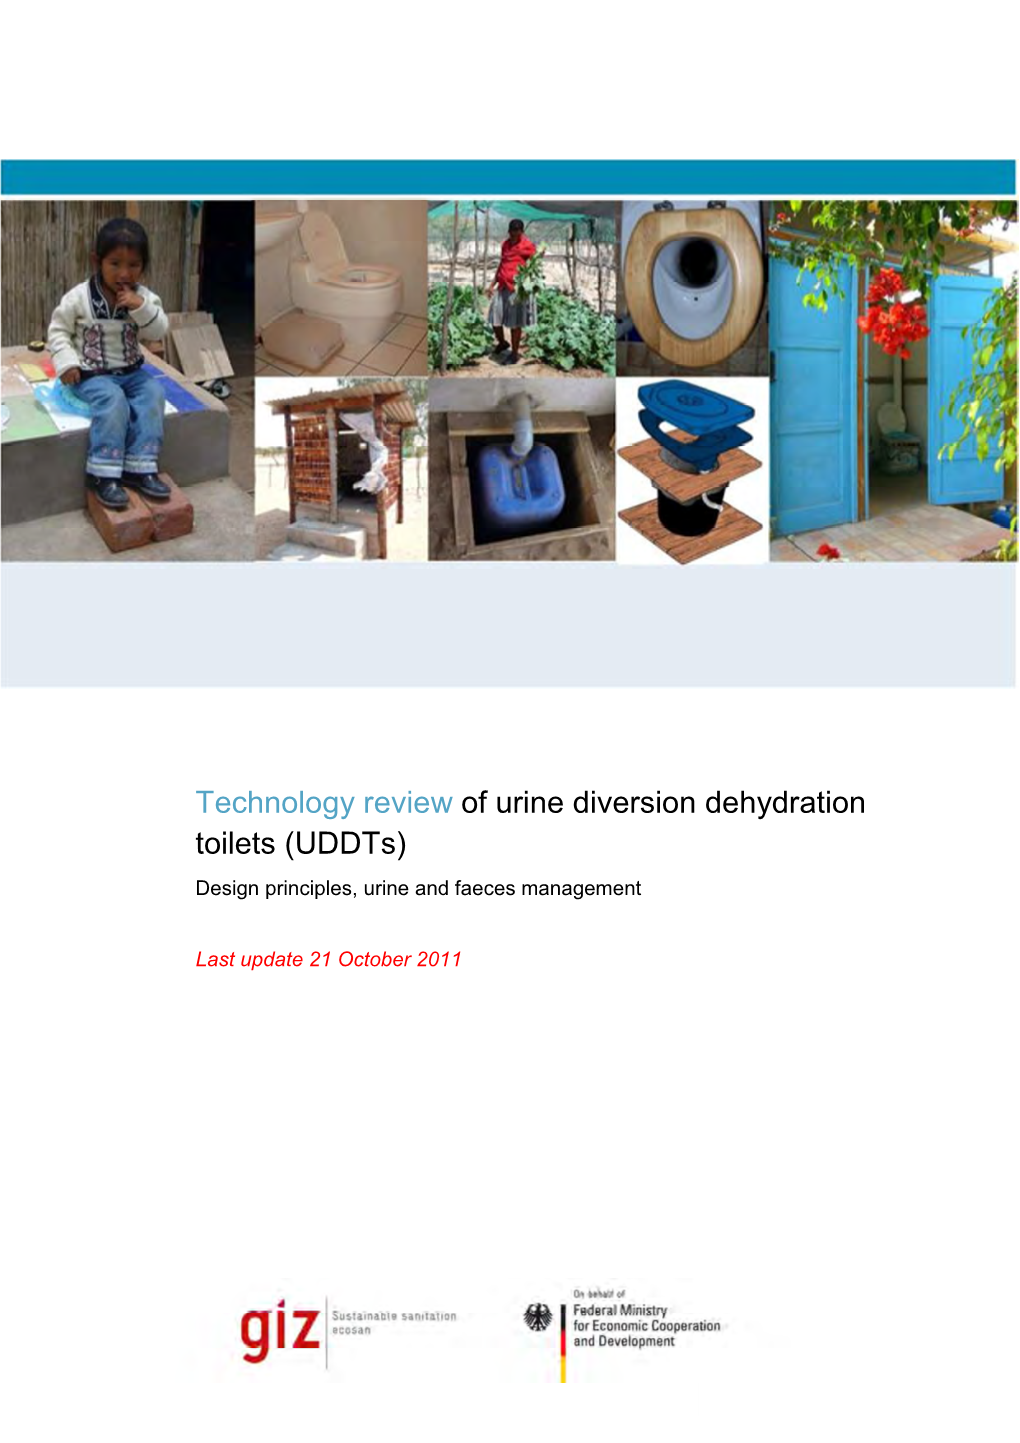 Technology Review of Urine Diversion Dehydration Toilets (Uddts) Design Principles, Urine and Faeces Management